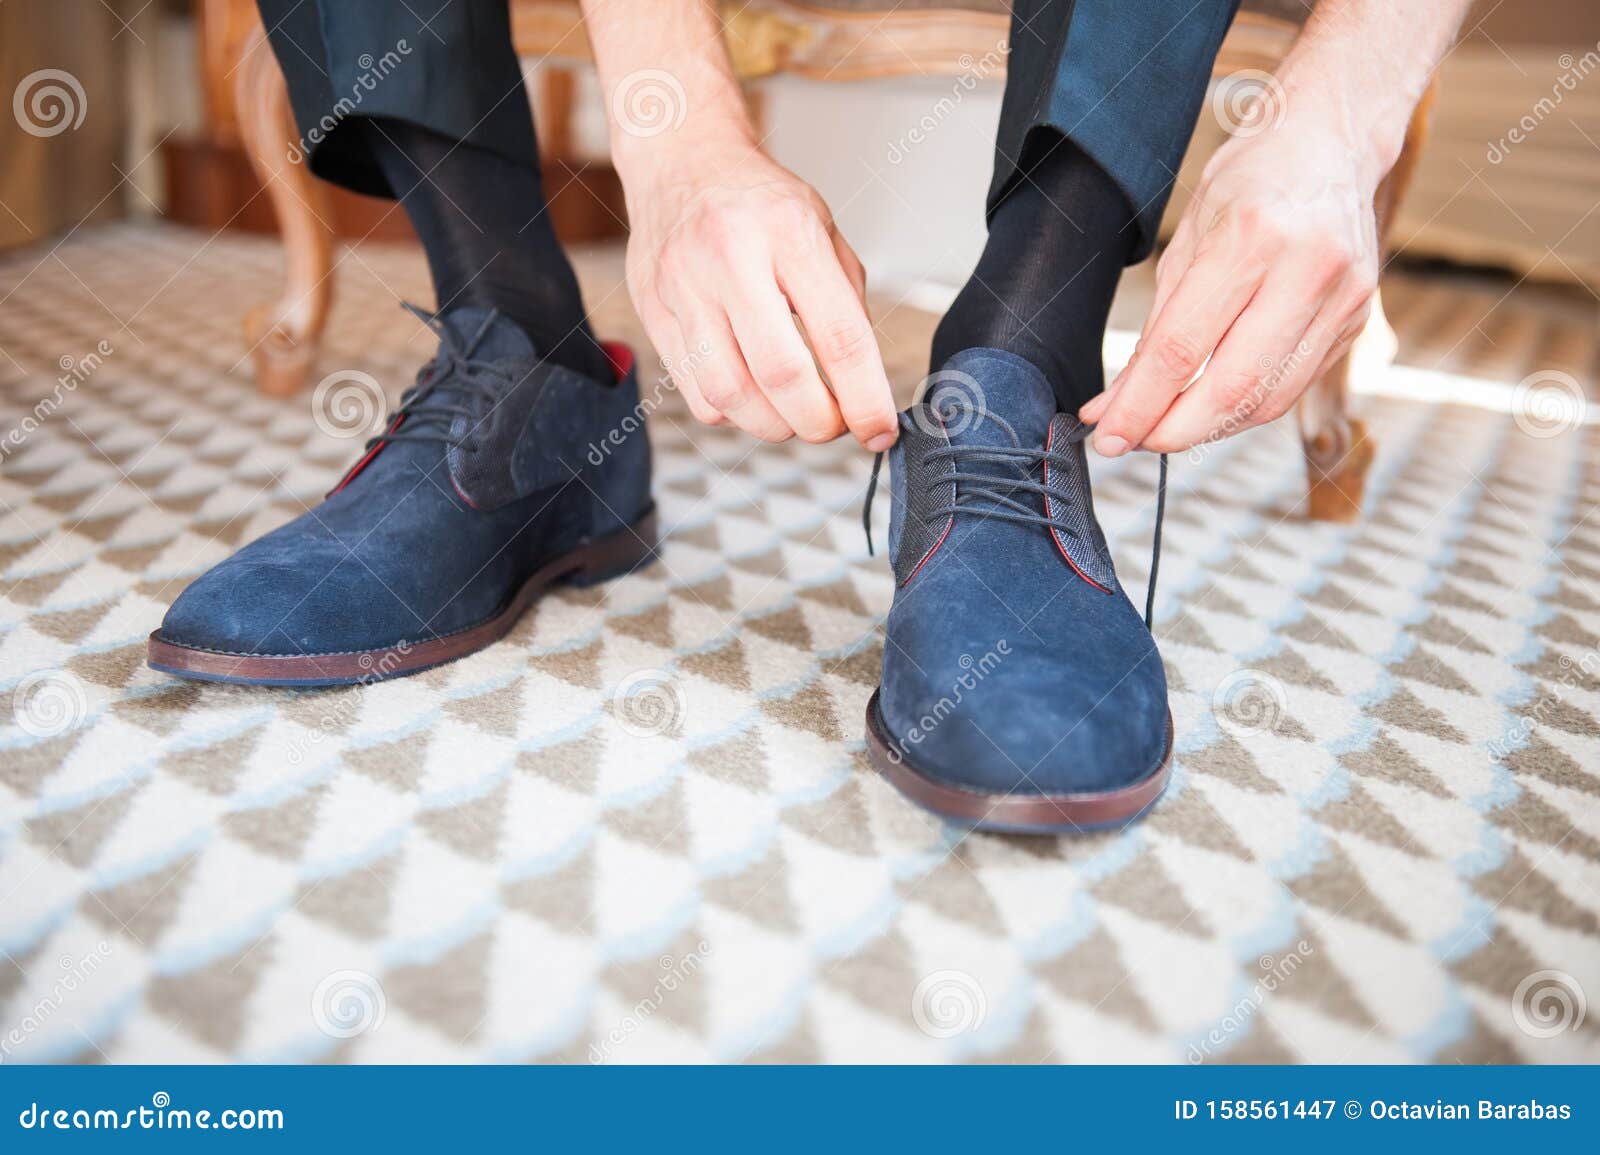 Men Closing Shoelace on Blue Suede Shoes Stock Image - Image of male ...